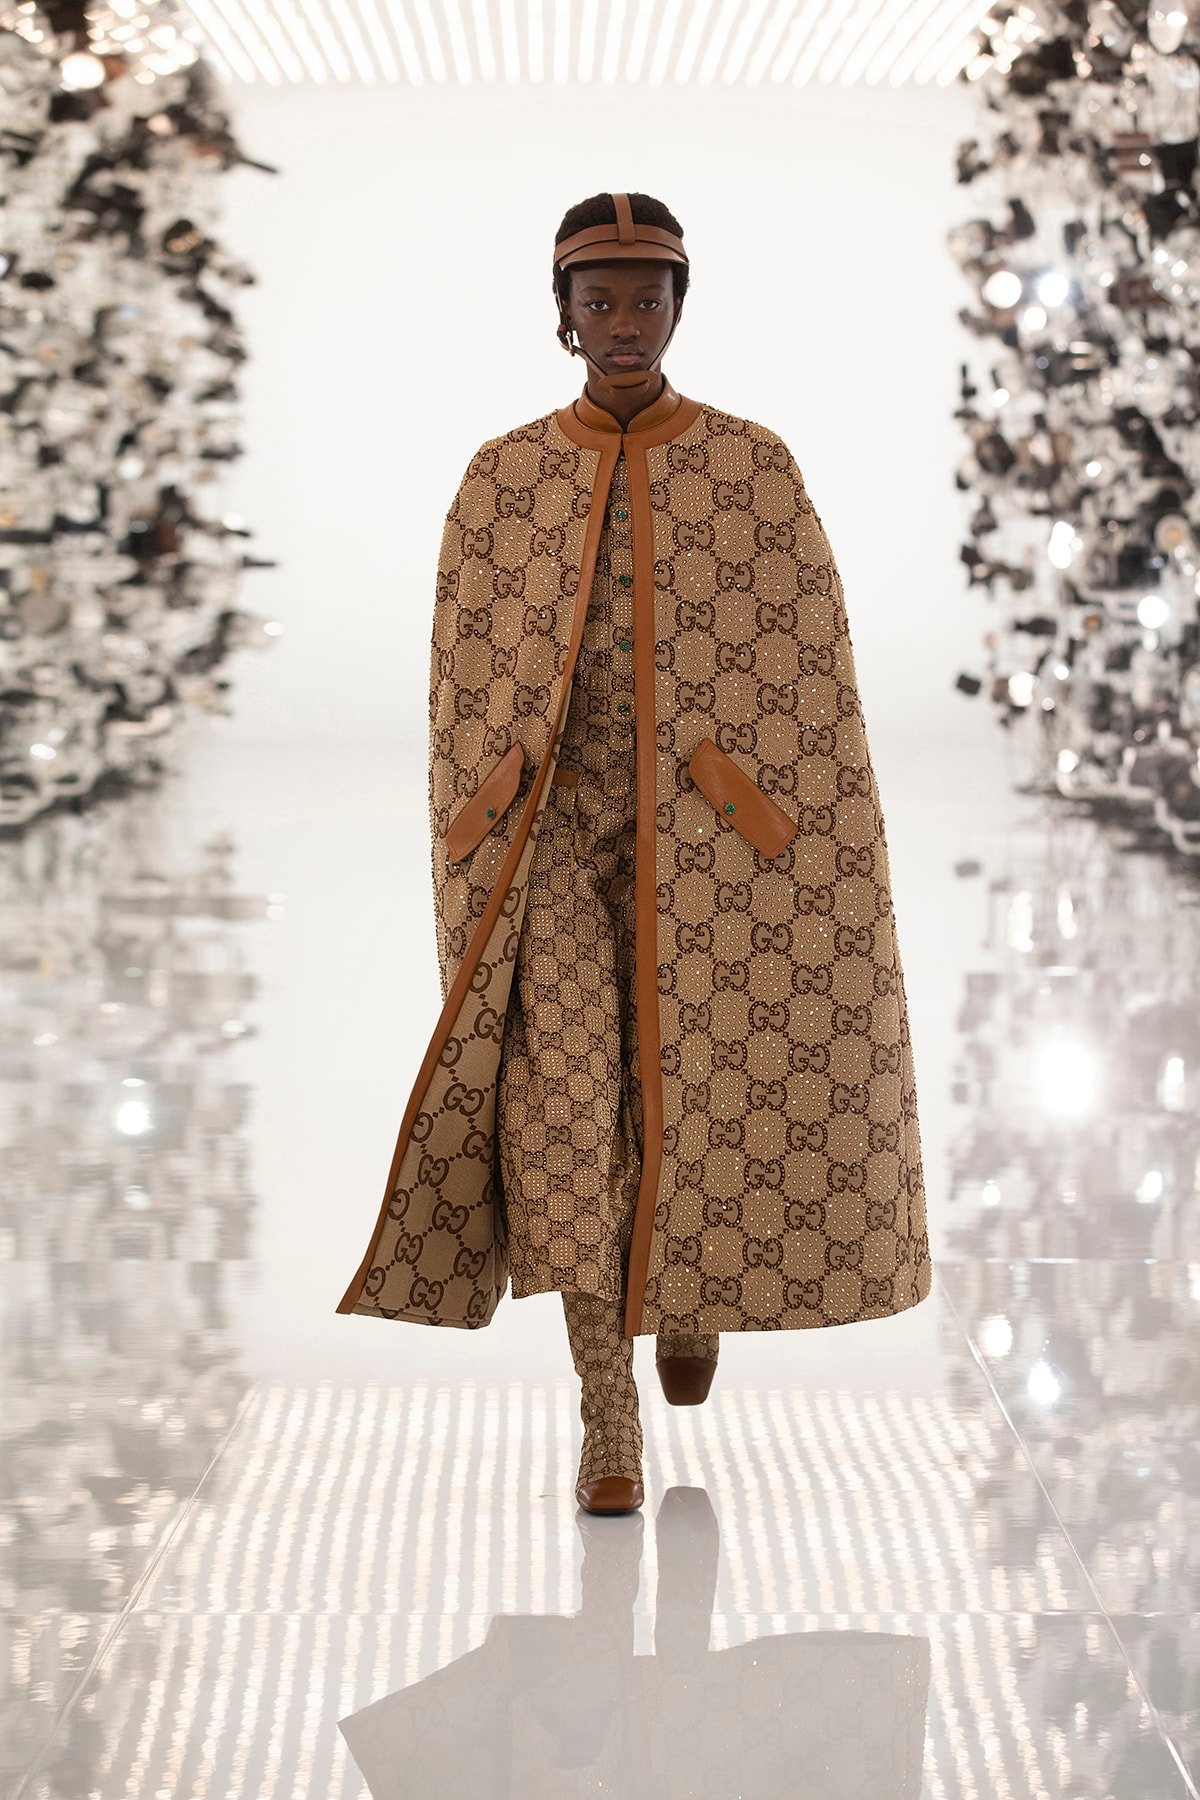 Gucci and Balenciaga Teamed Up for Gucci's Fall 2021 Collection